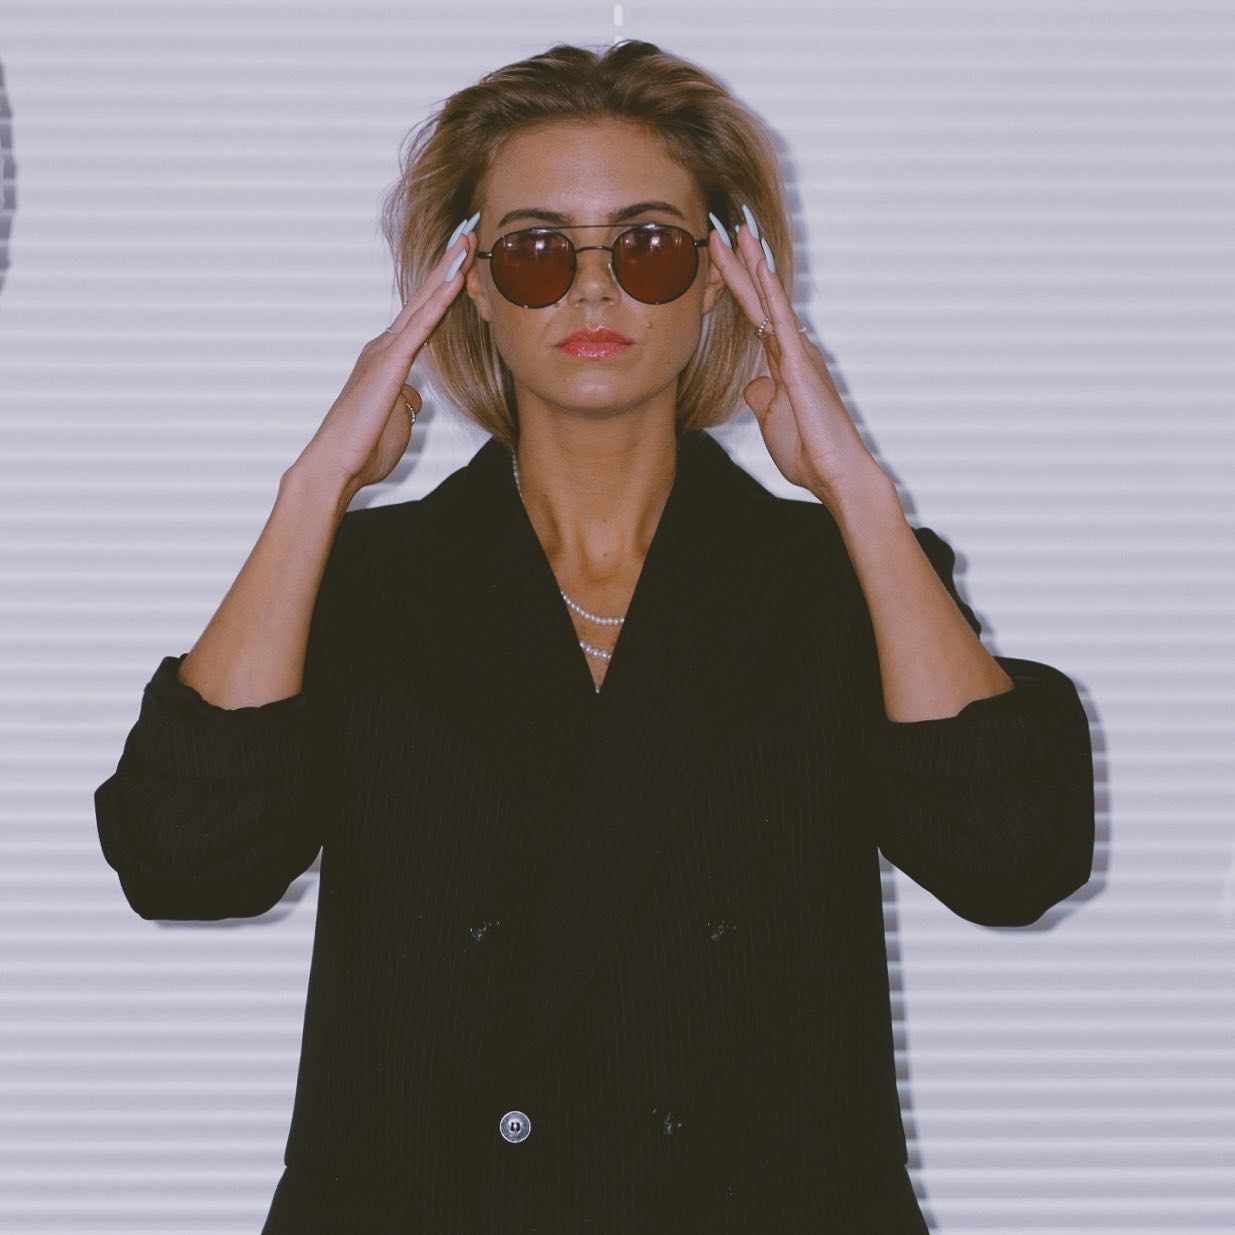 Oversized blazer, shades and perfectly “undone” hair tucked inside the collar - now that’s something our ellwo women knows how to pull off! #ellwouniverse